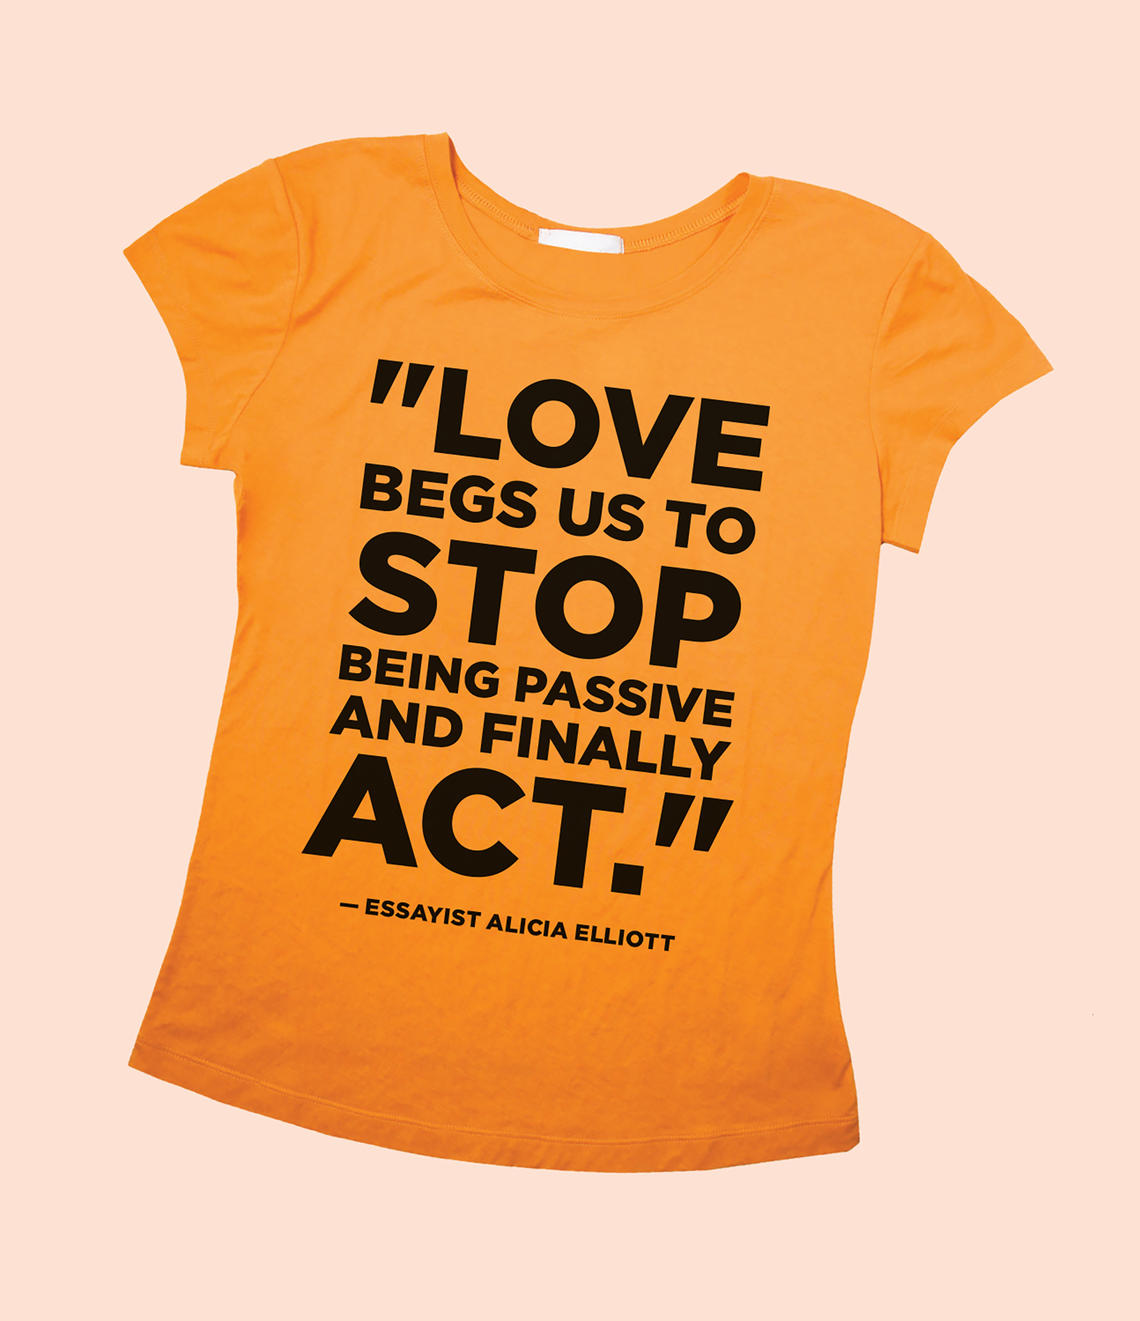 "Love begs us to stop being passice and finally act"